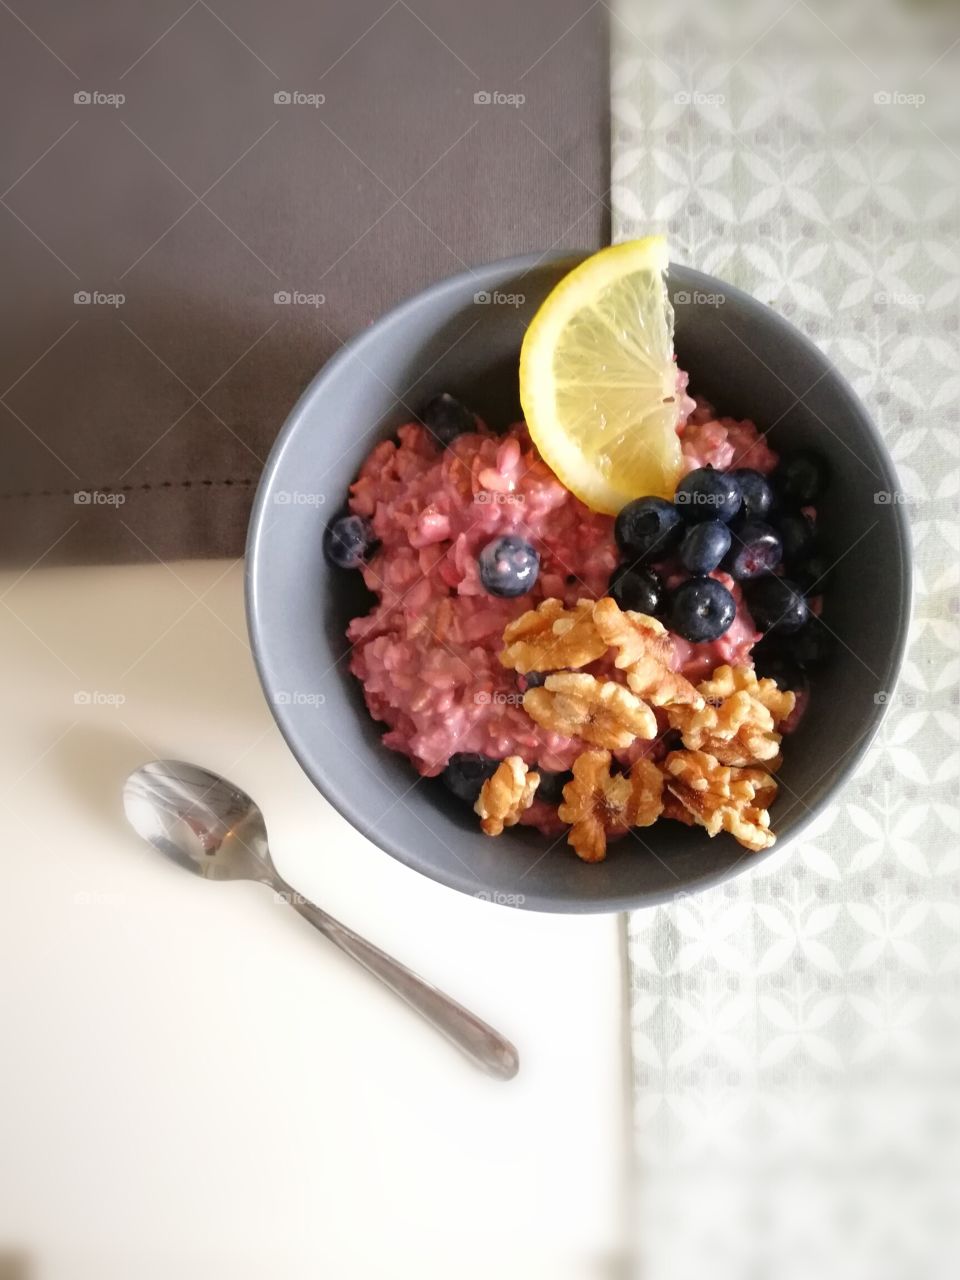 Breakfast bowl with pink oat meal, nuts and blueberries with a lemon slice and a spoon